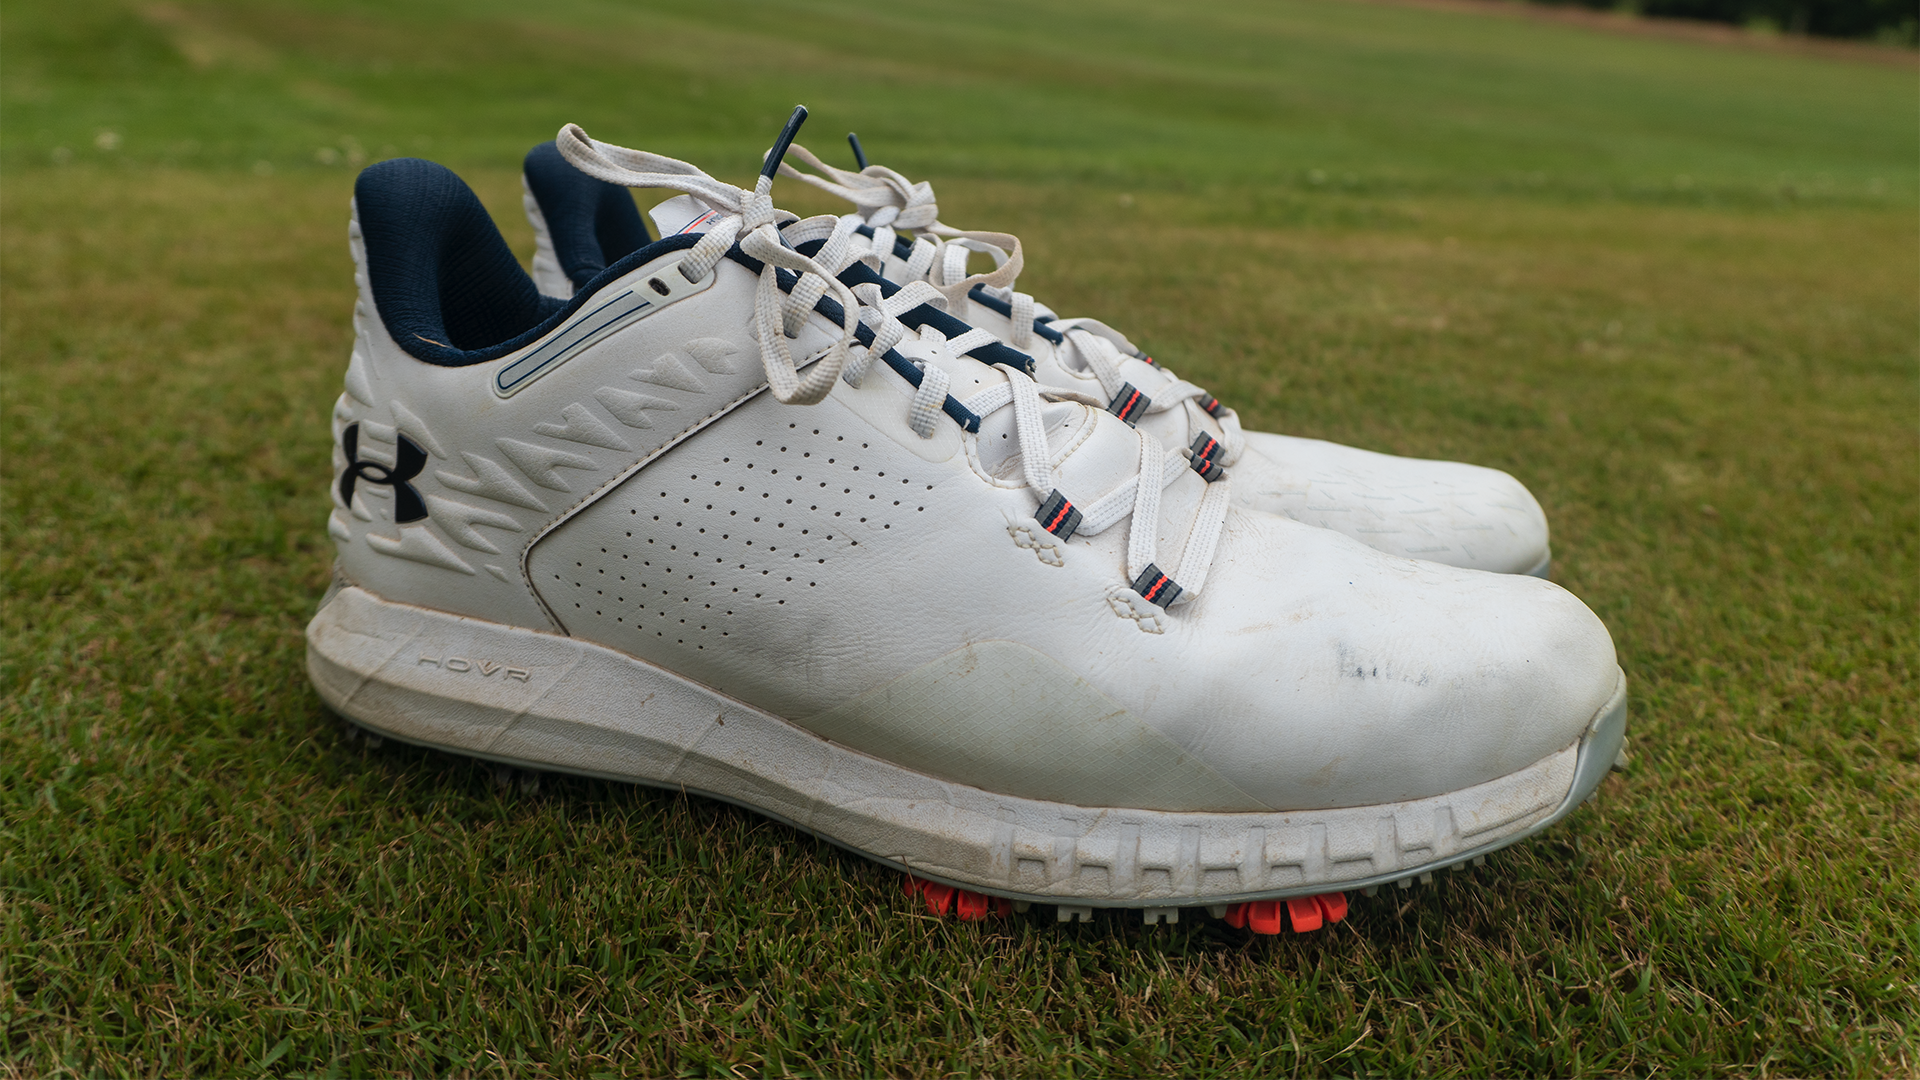 Under Armour HOVR Drive 2 Golf Shoes Review